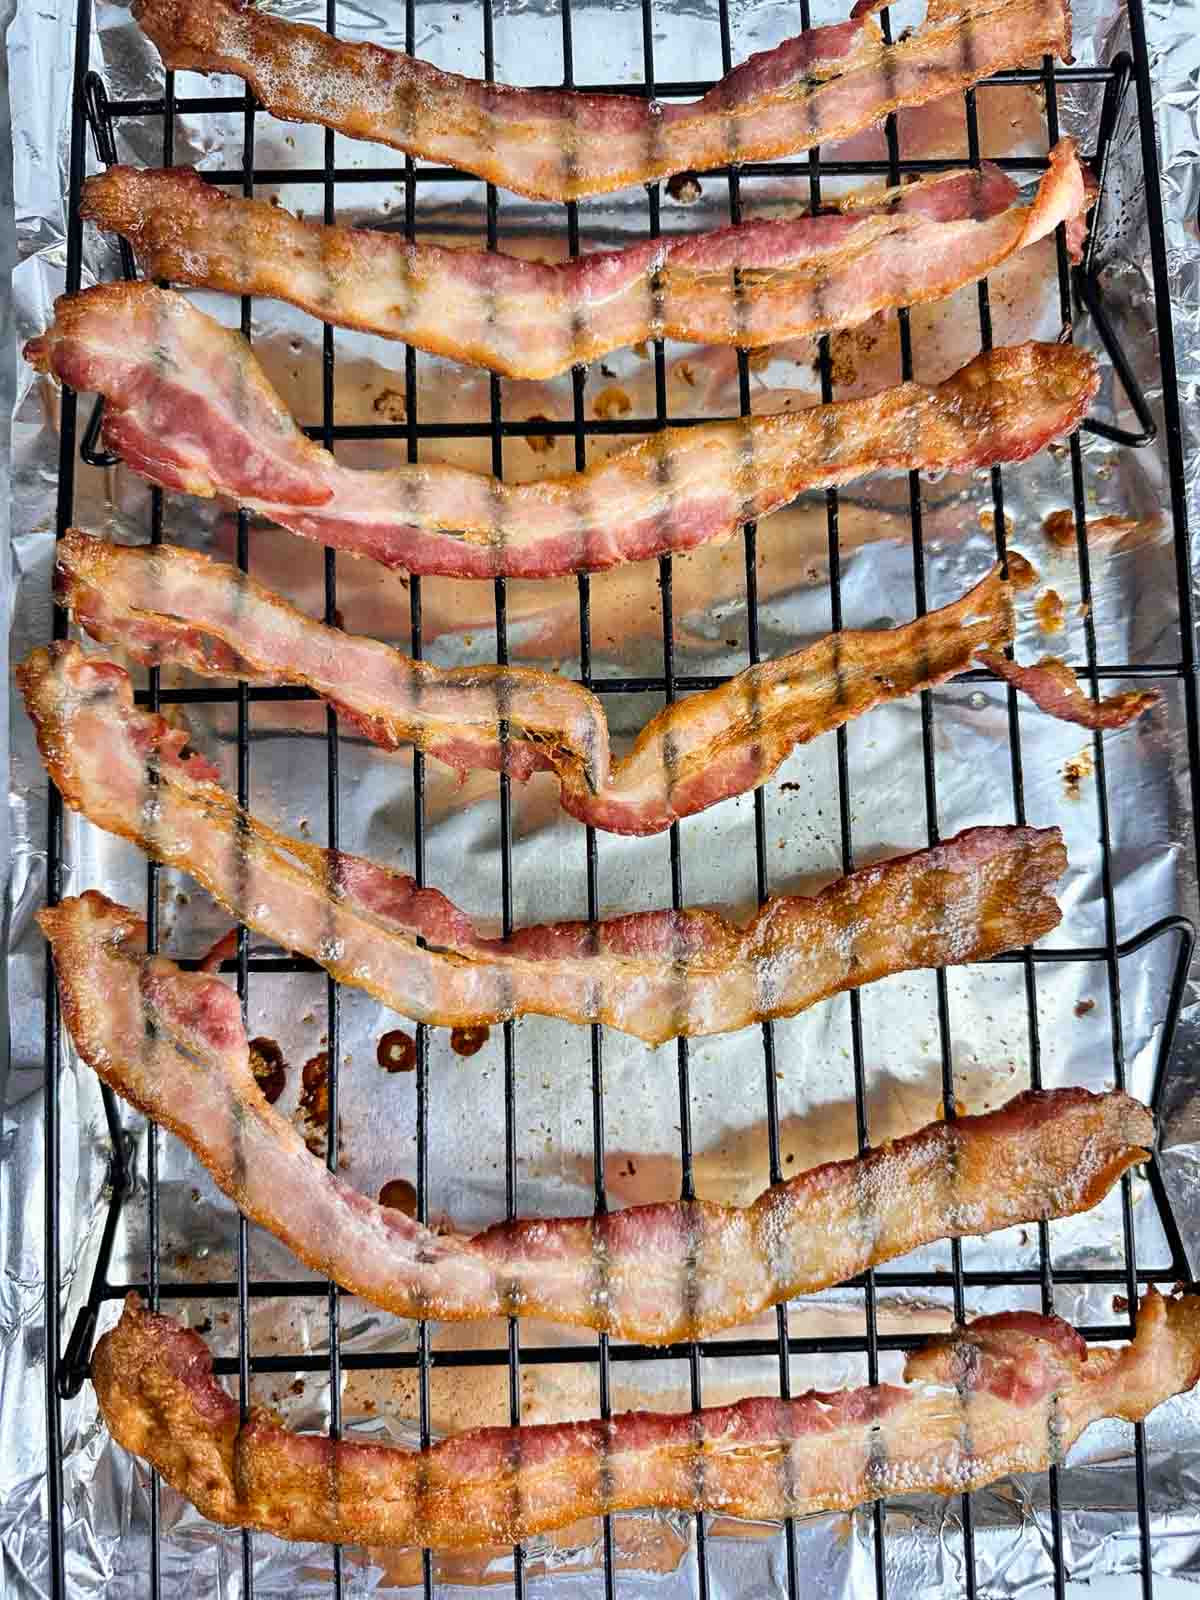 Crisp strips of bacon fresh out of the convection oven on a cooking rack set on top of a foil lined tray